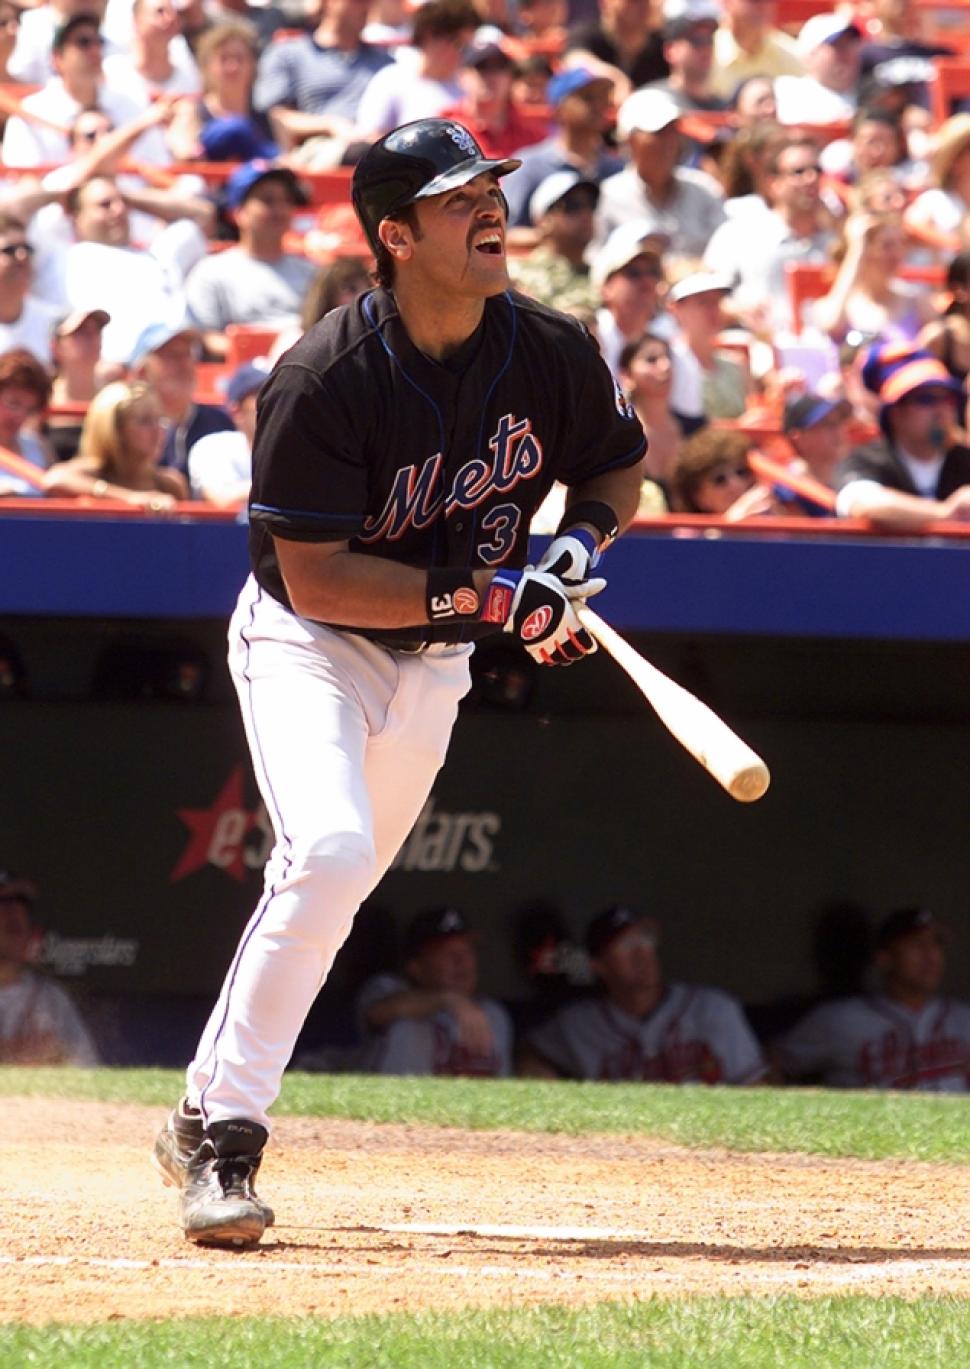 Happy Birthday to Mike Piazza who turns 49 today! 